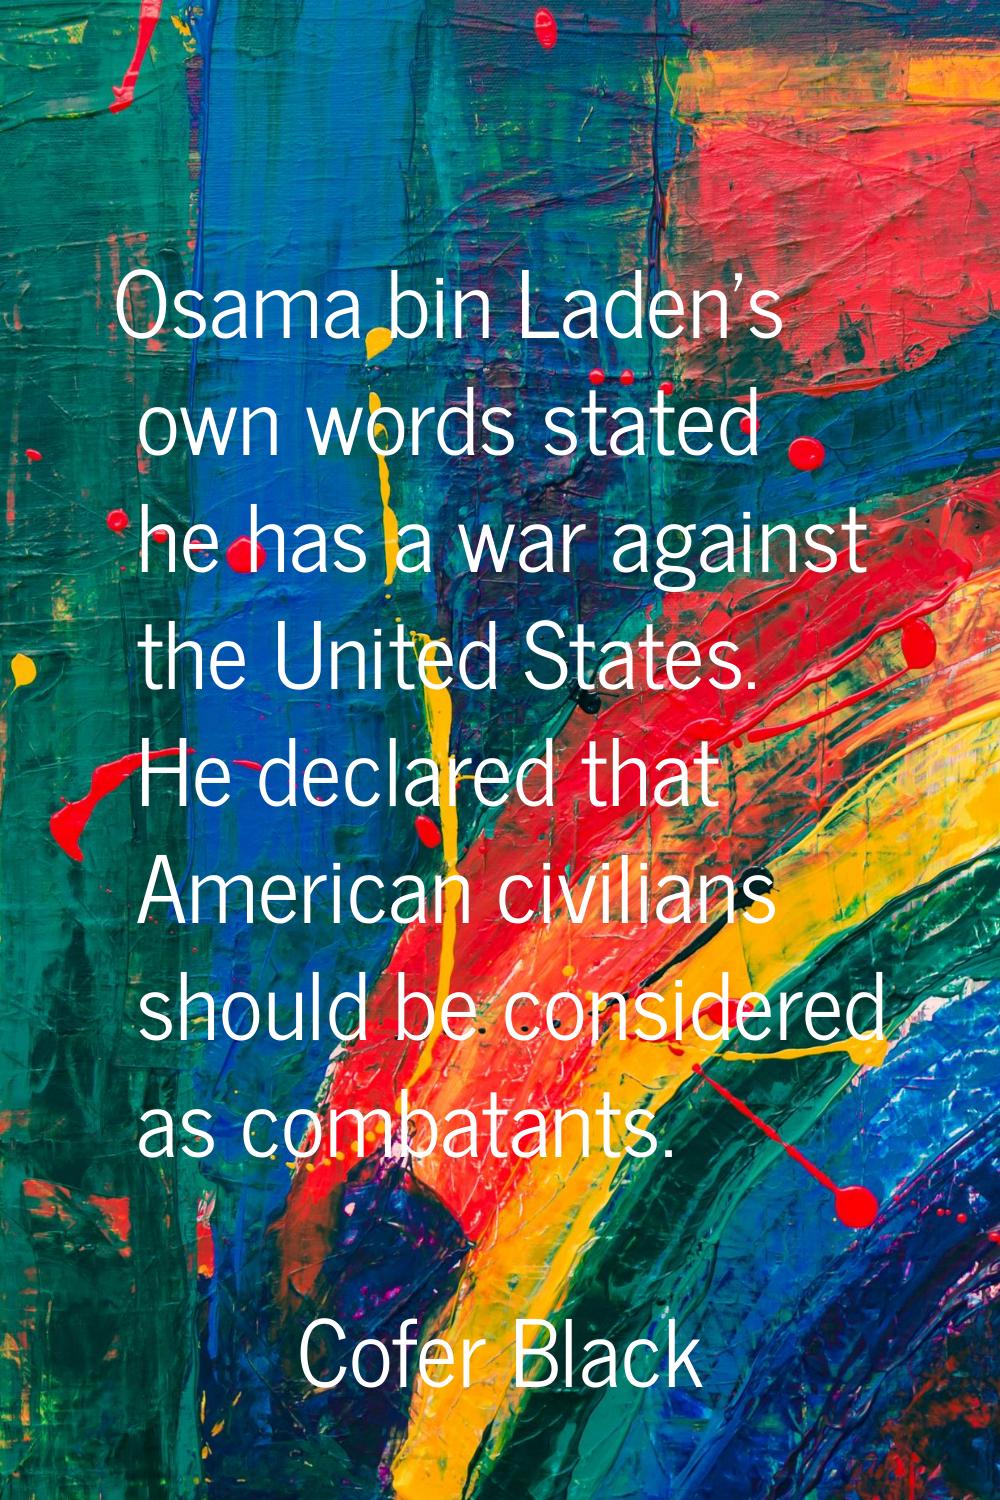 Osama bin Laden's own words stated he has a war against the United States. He declared that America